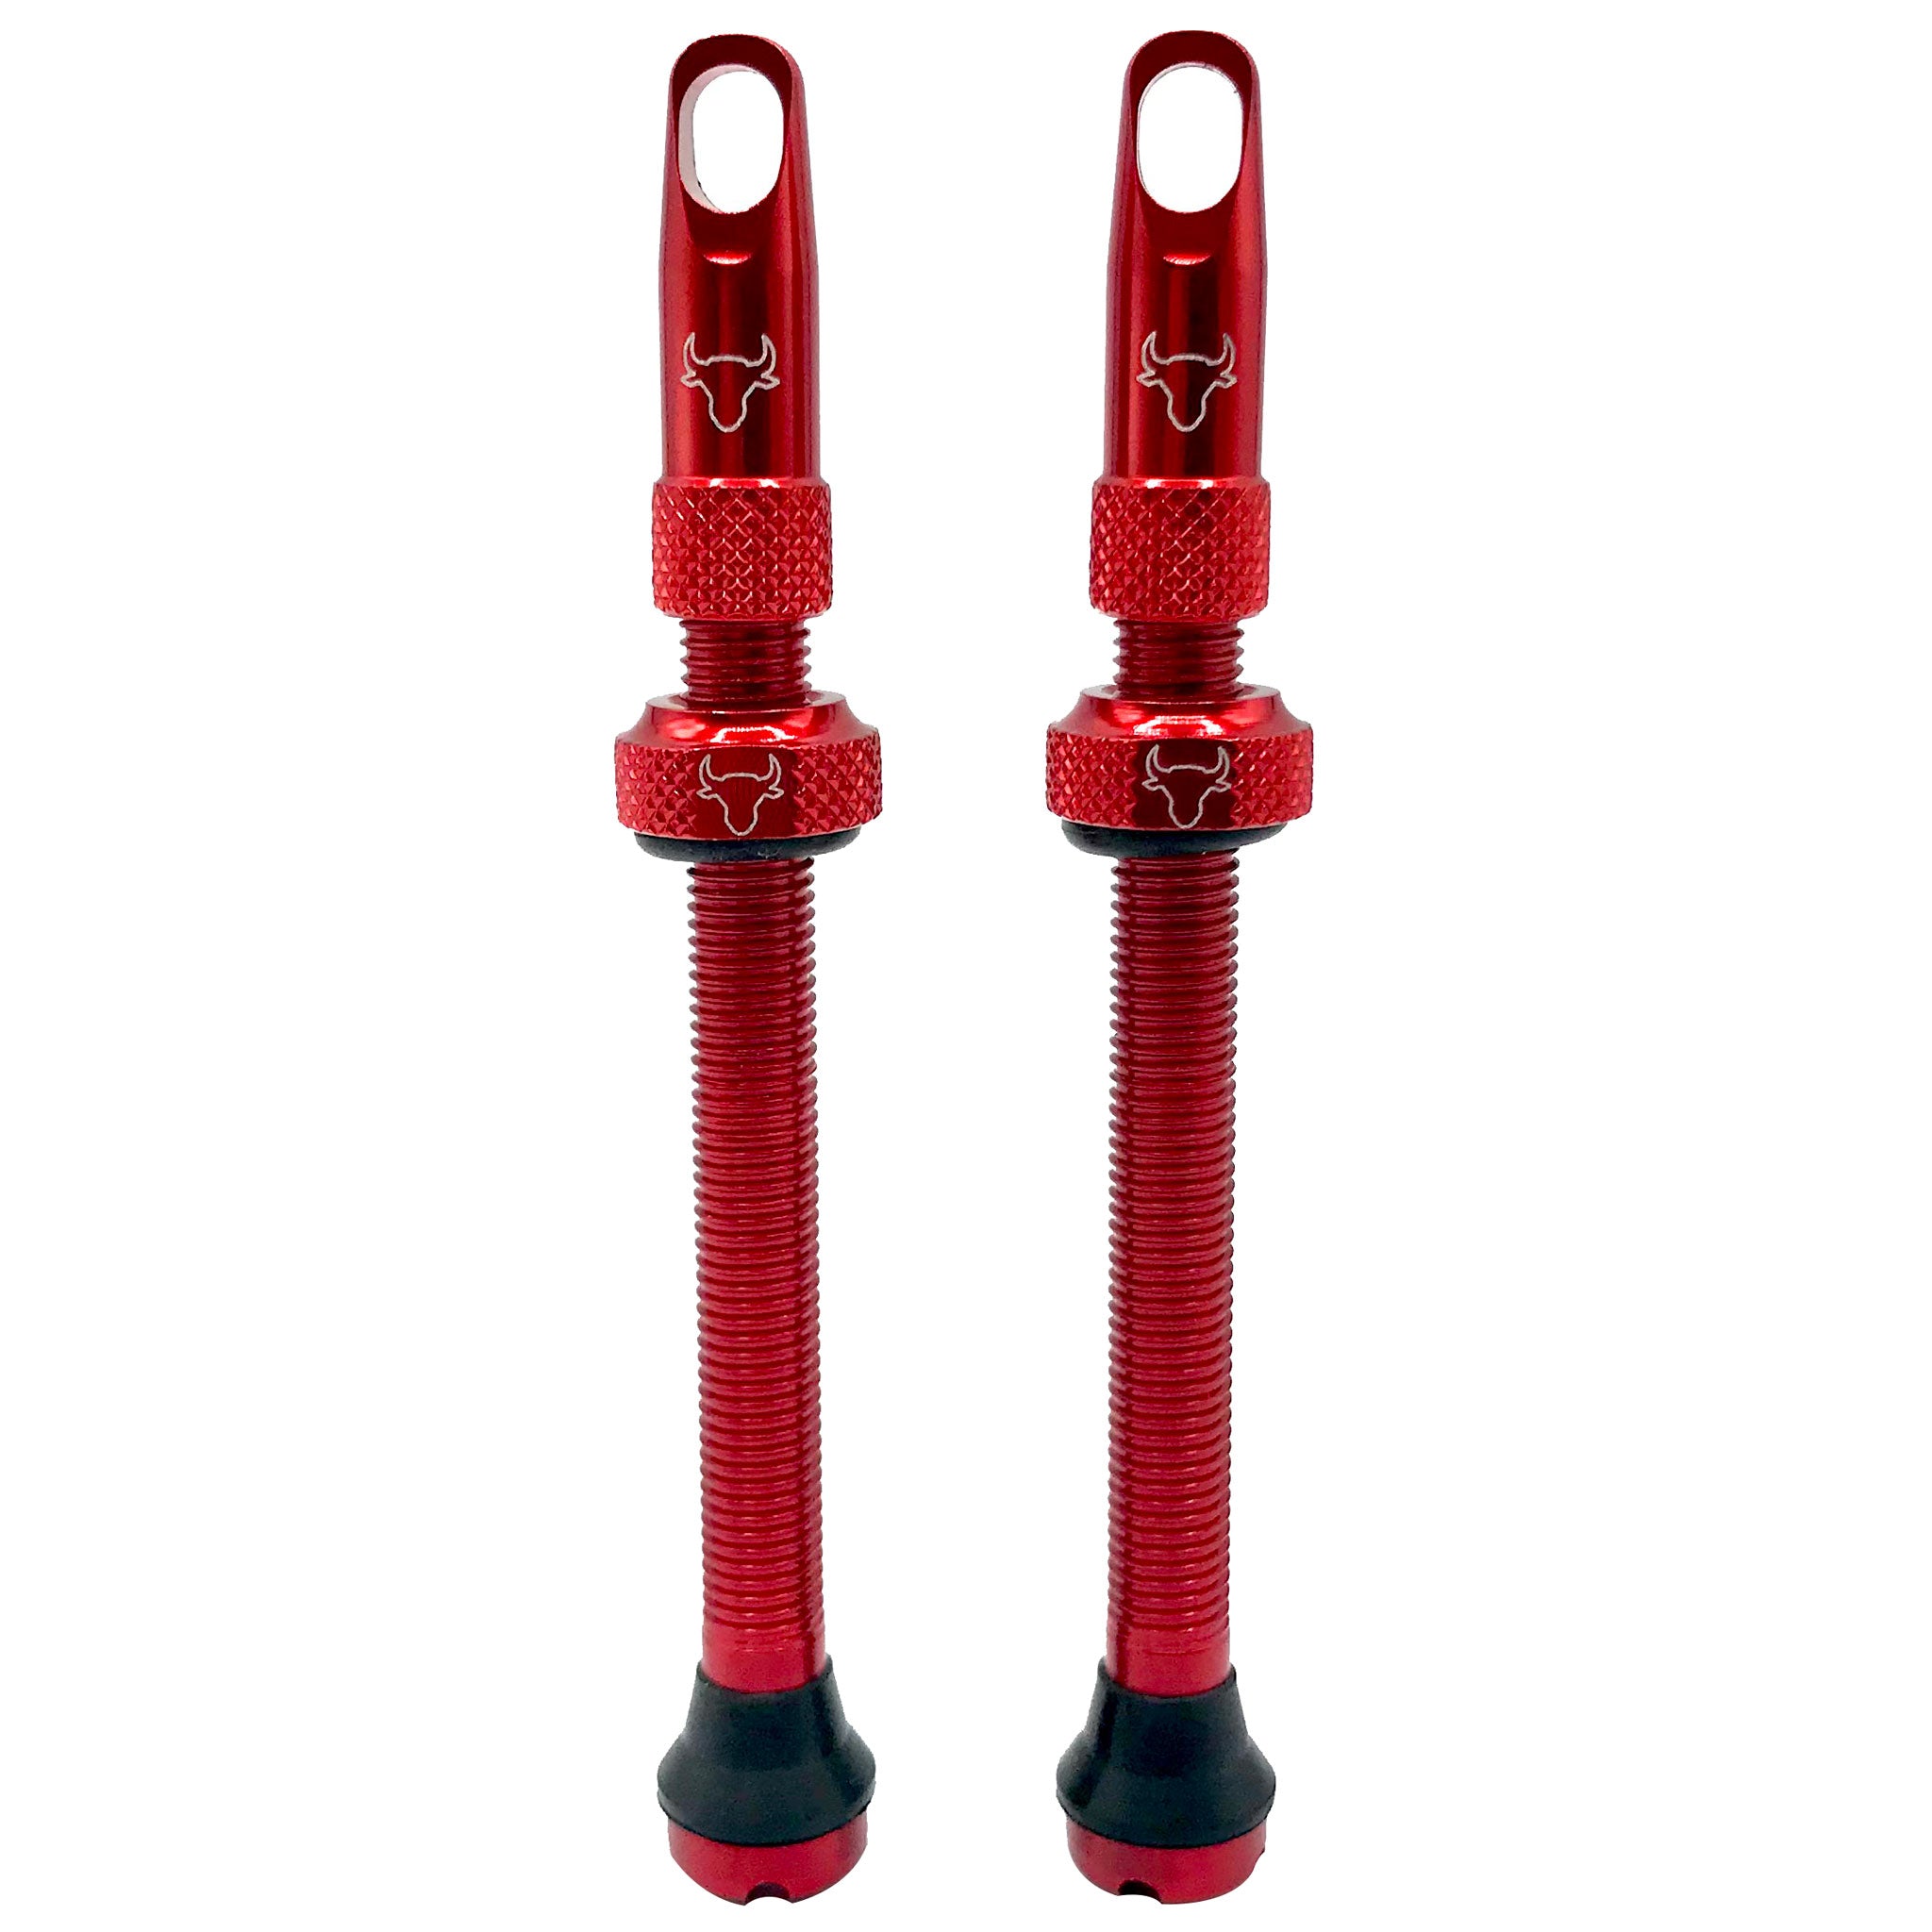 Hold Fast Cycling Tubeless Valve Stem 65mm (Pair) - Red